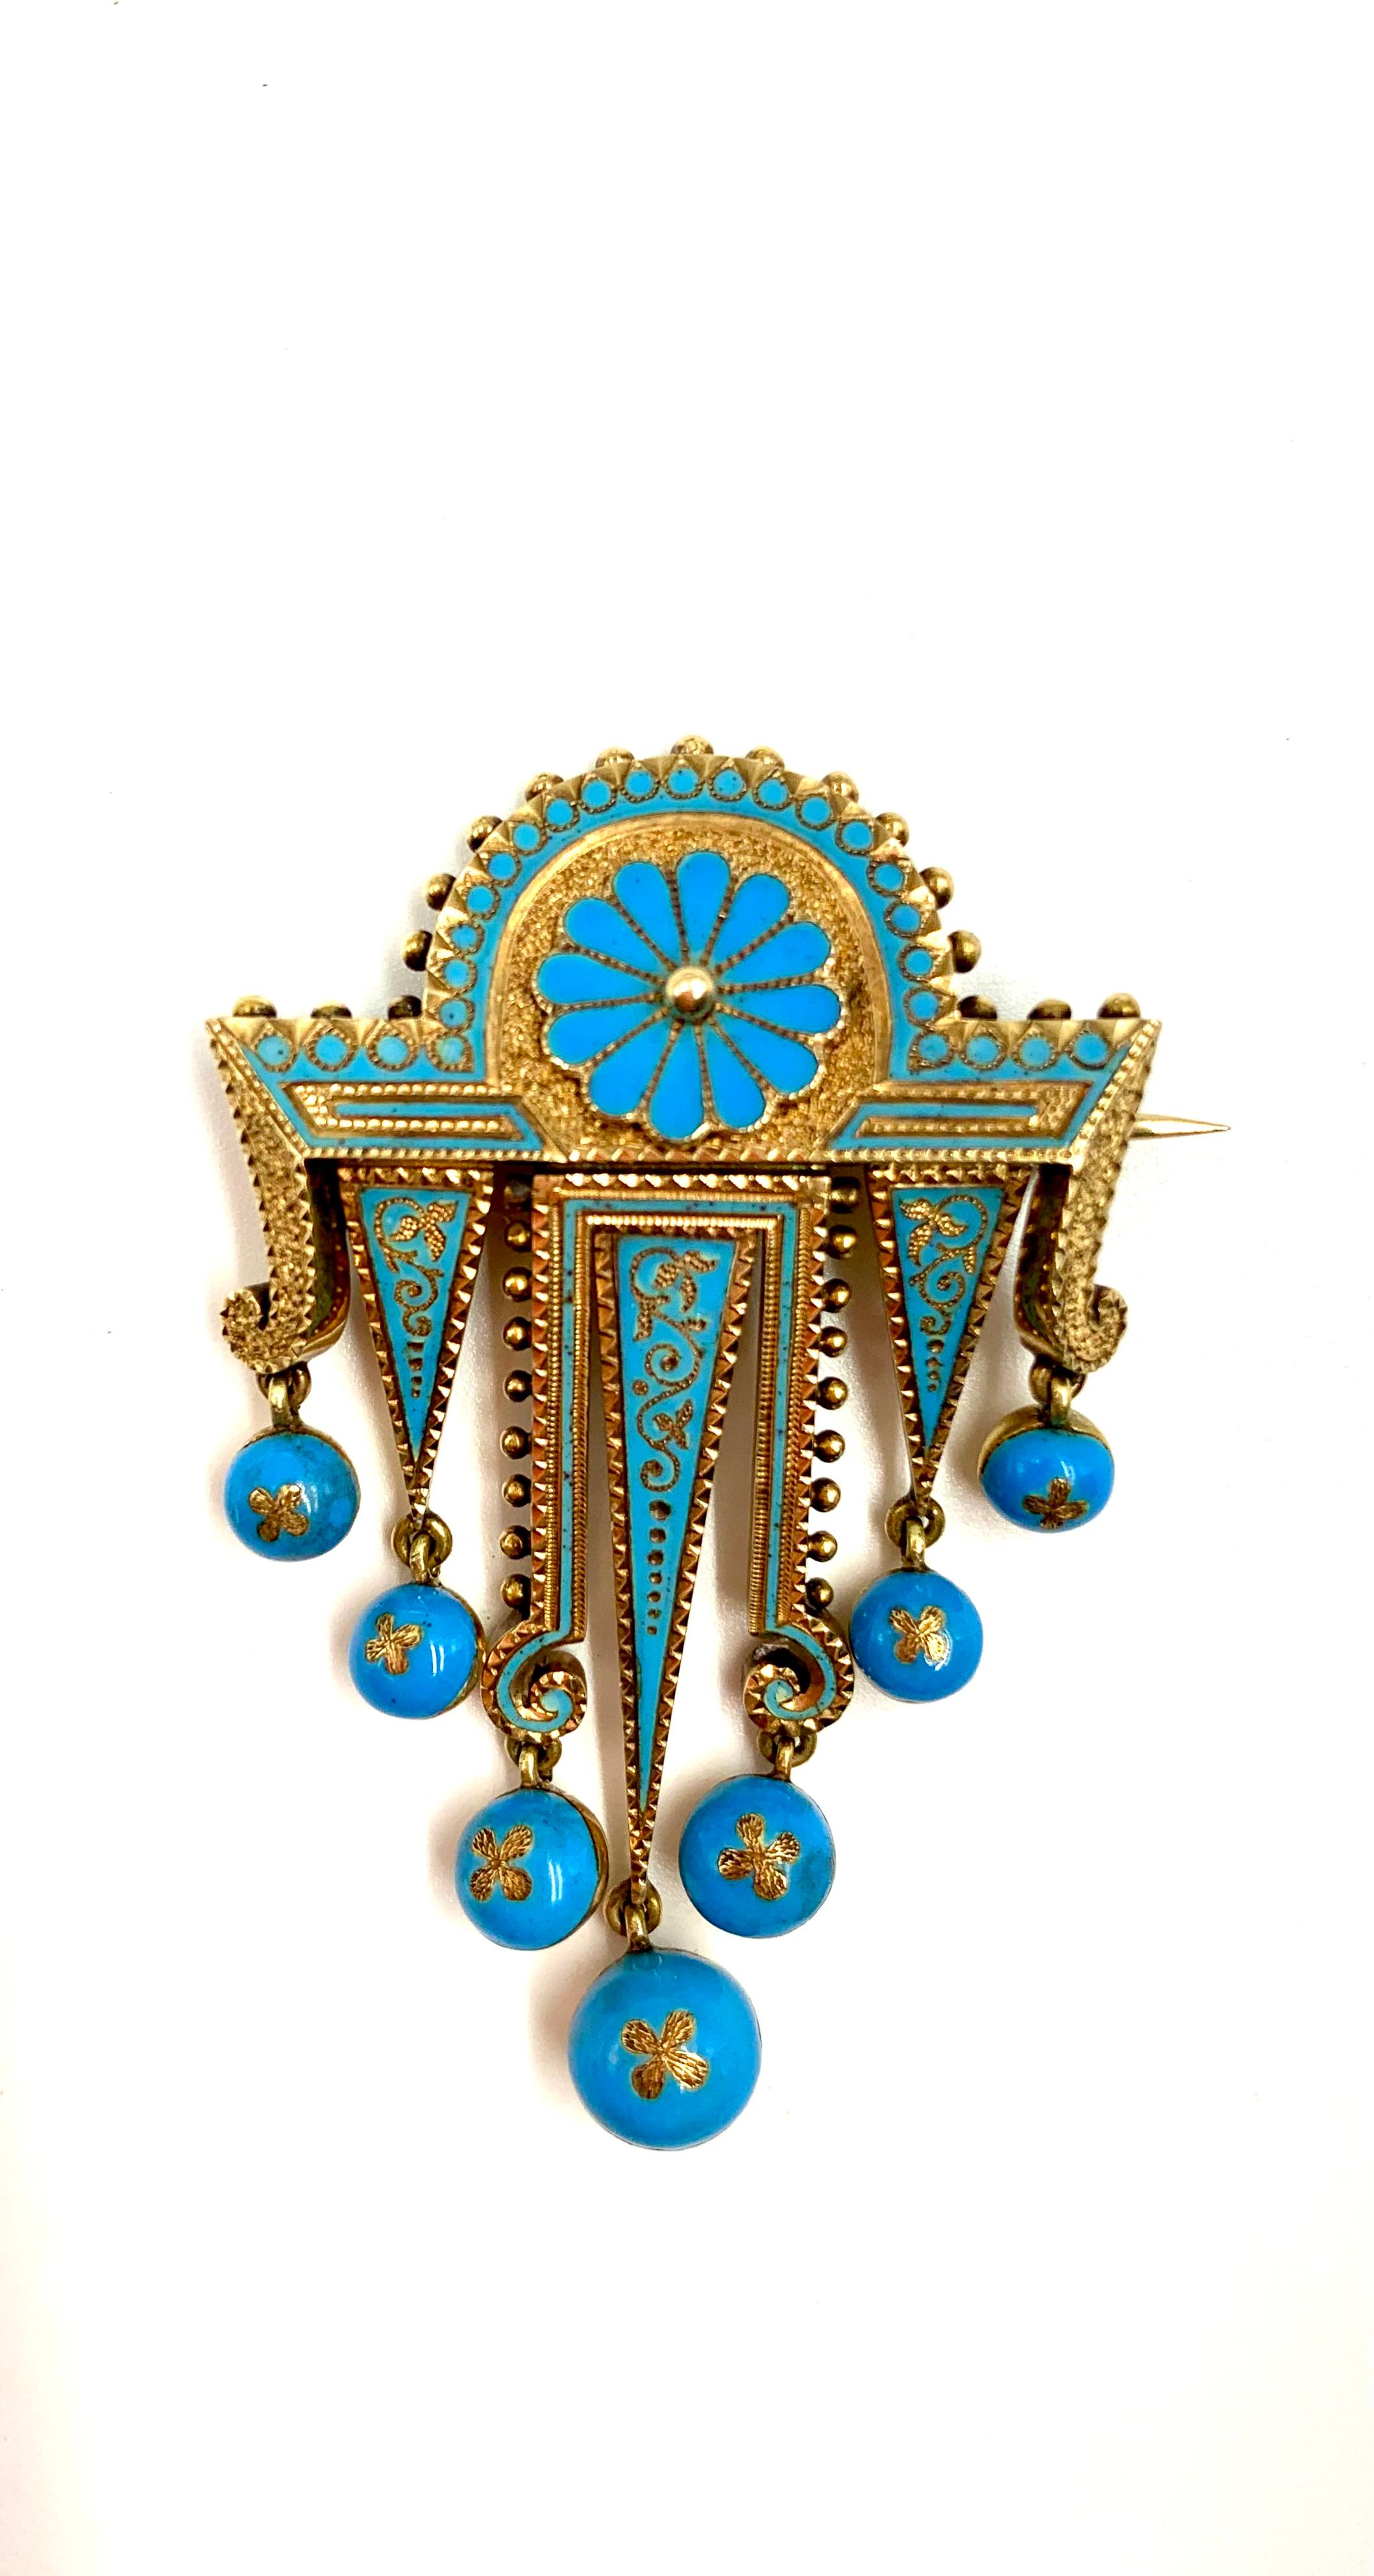 Women's or Men's Etruscan Revival Turquoise Enamel 14K Yellow Gold Earrings and Brooch Parure For Sale